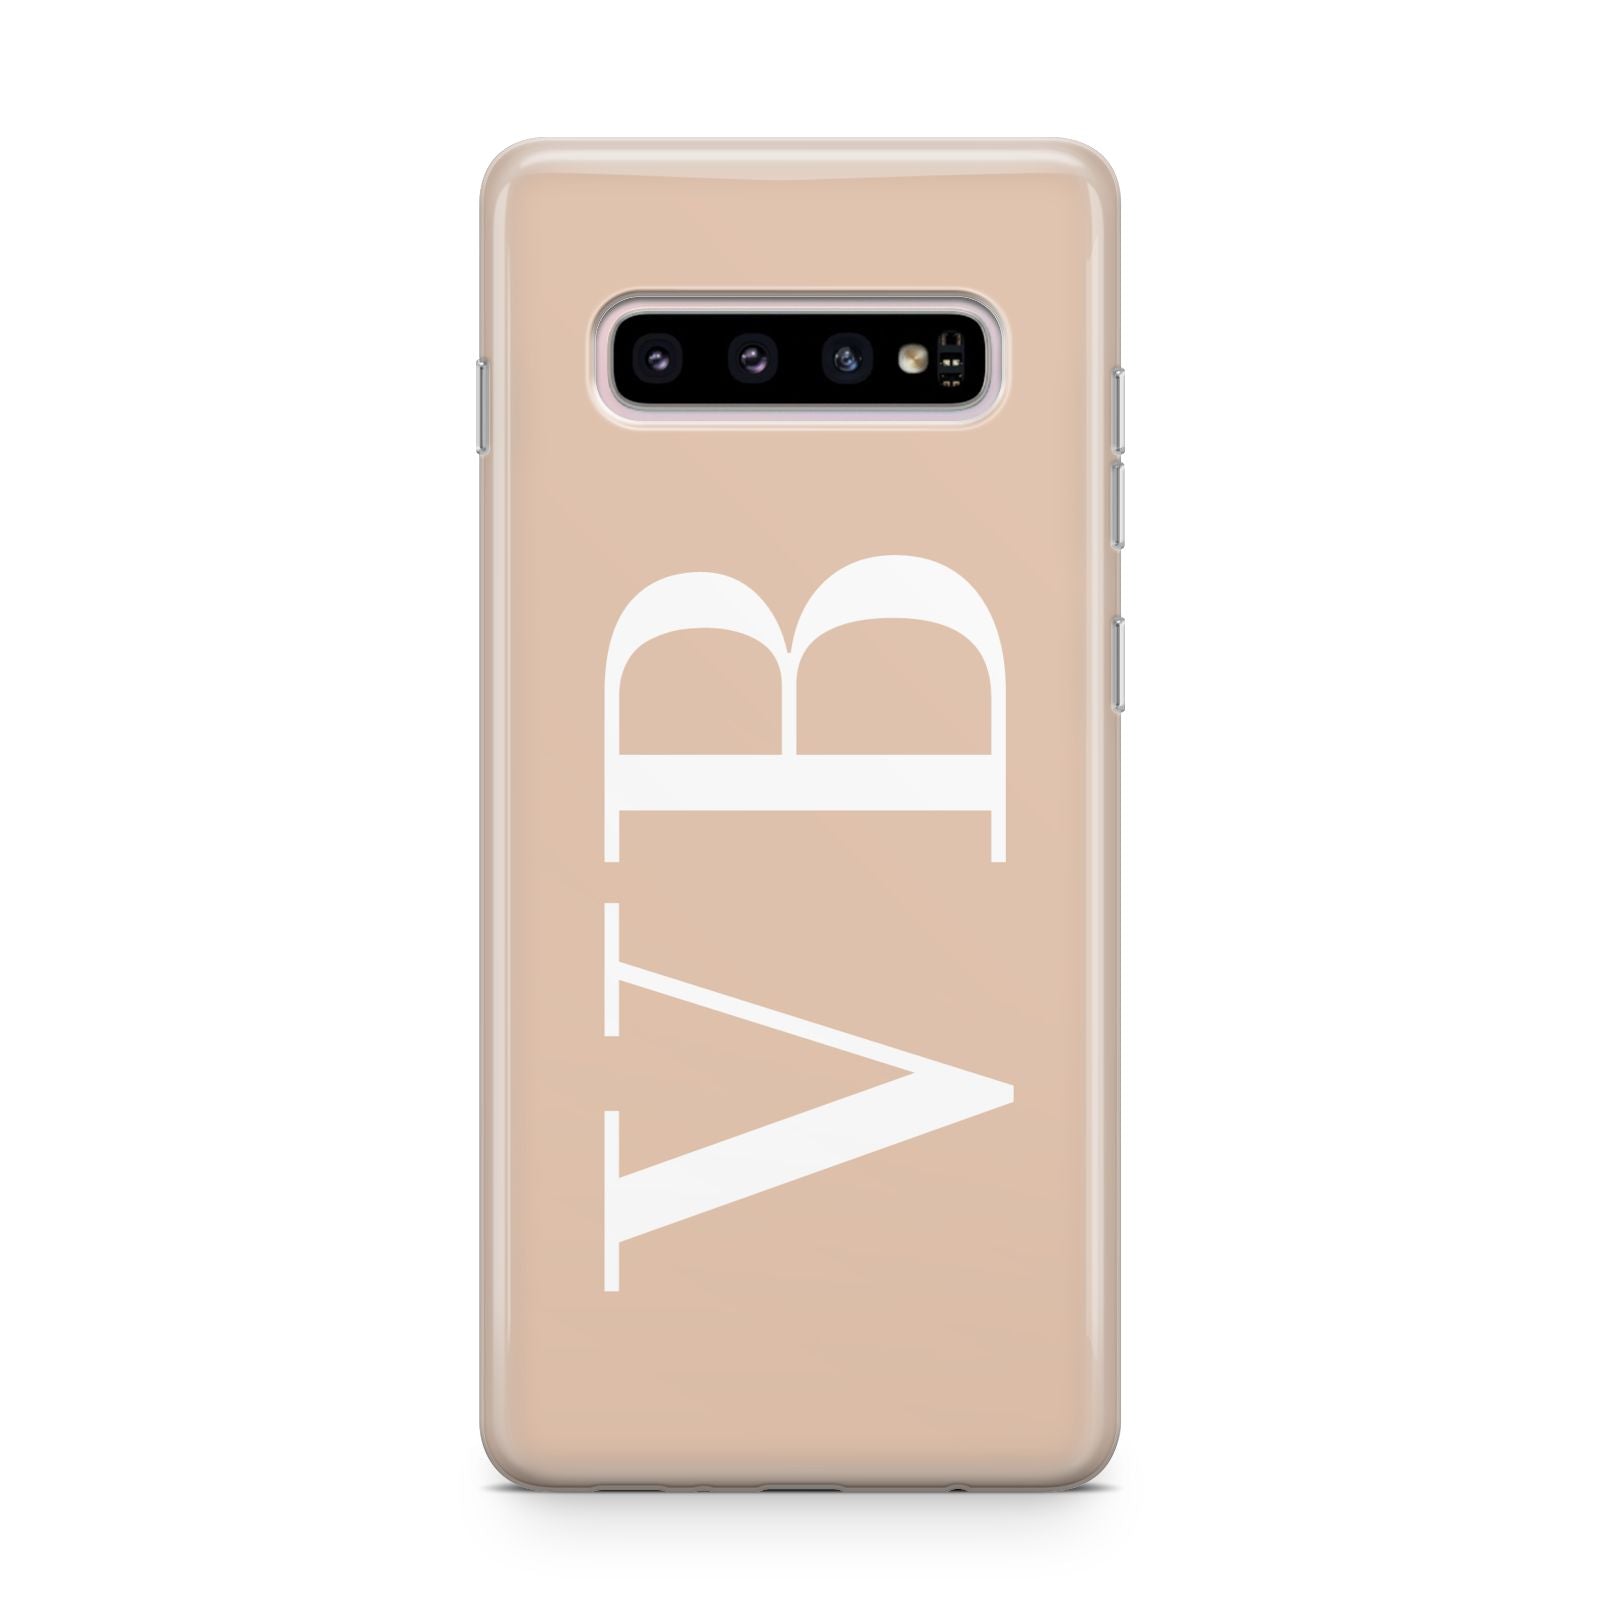 Nude And White Personalised Samsung Galaxy S10 Plus Case